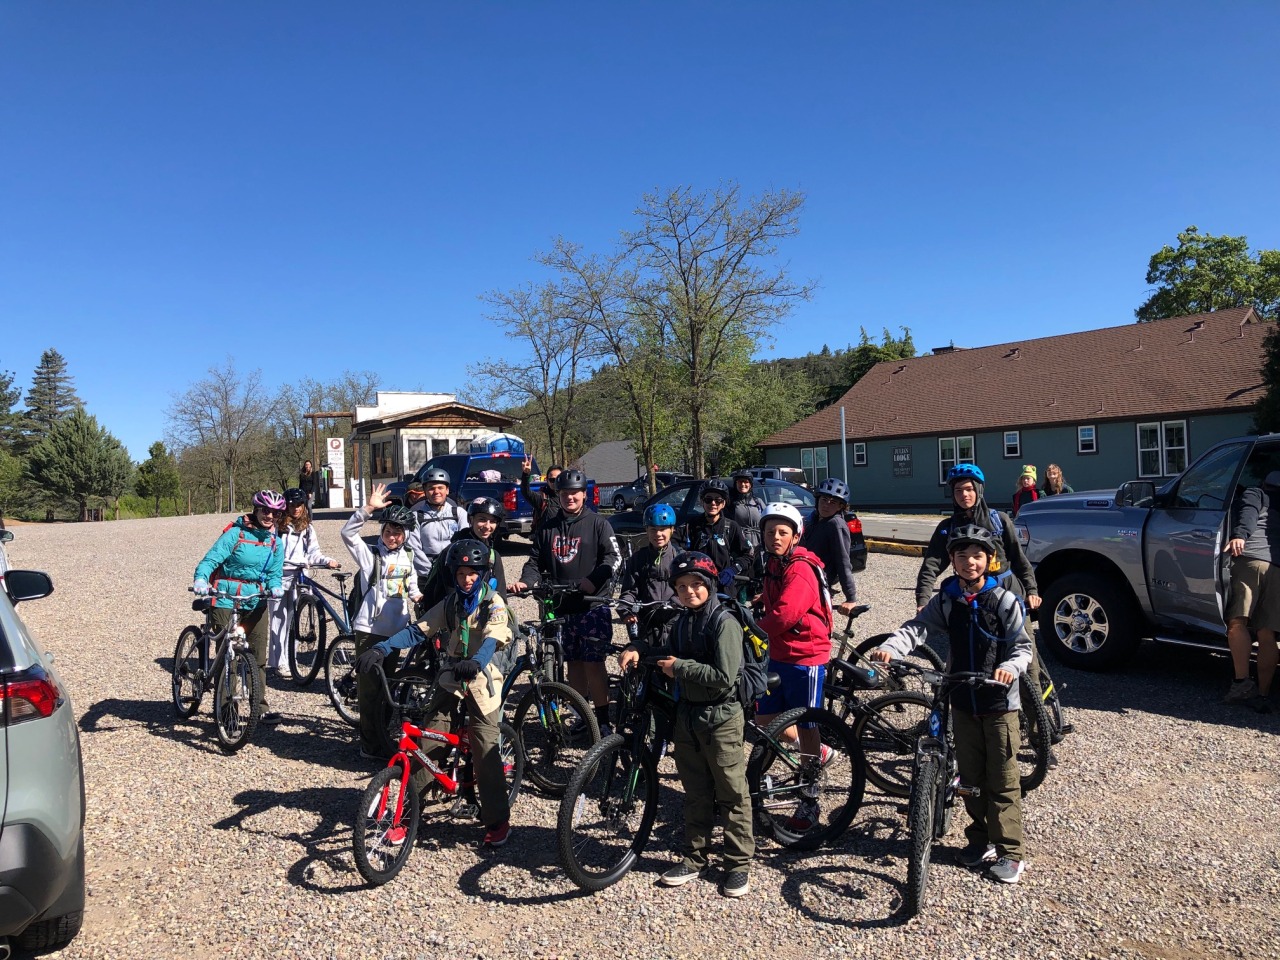 Troop 318 had an amazing time at Agua Caliente! Troop 318 B and part of 318 G biked 33 miles from Julian to Agua Caliente. Very proud of every one who biked and hiked on that day!